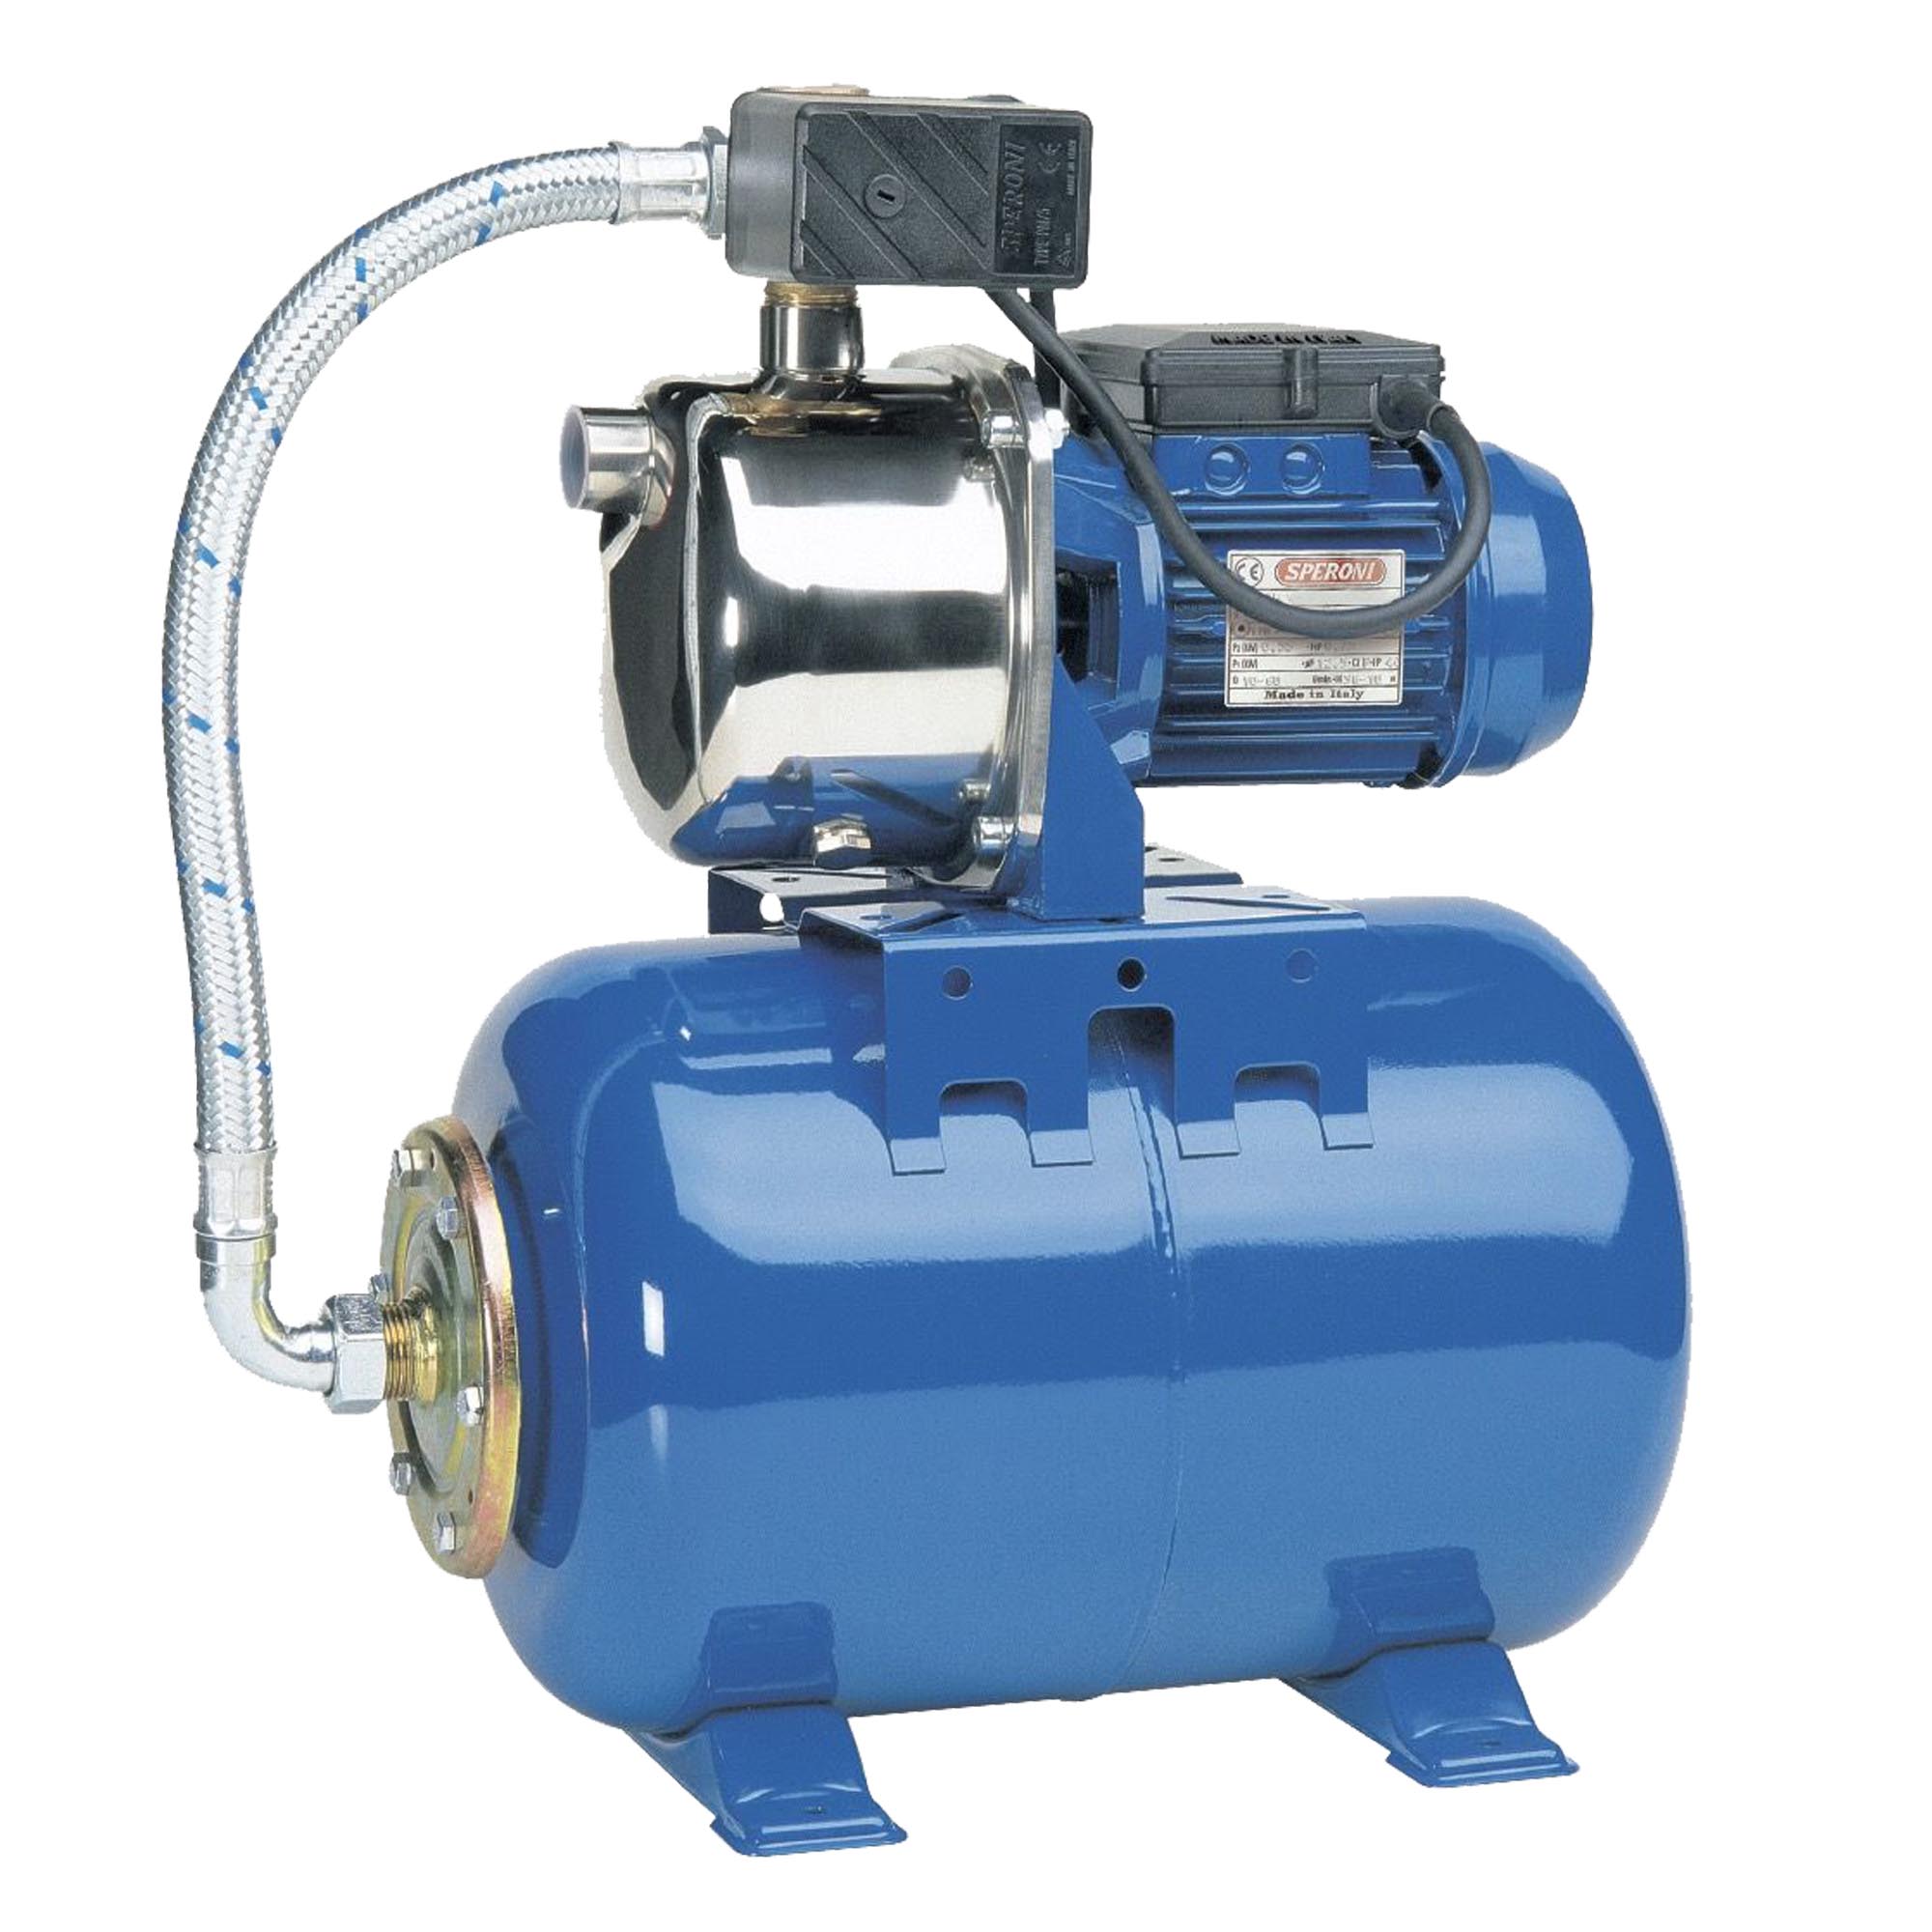 WATER KING Single Phase 1 Hp Booster Pump, 25 LPM, 230 V at Rs